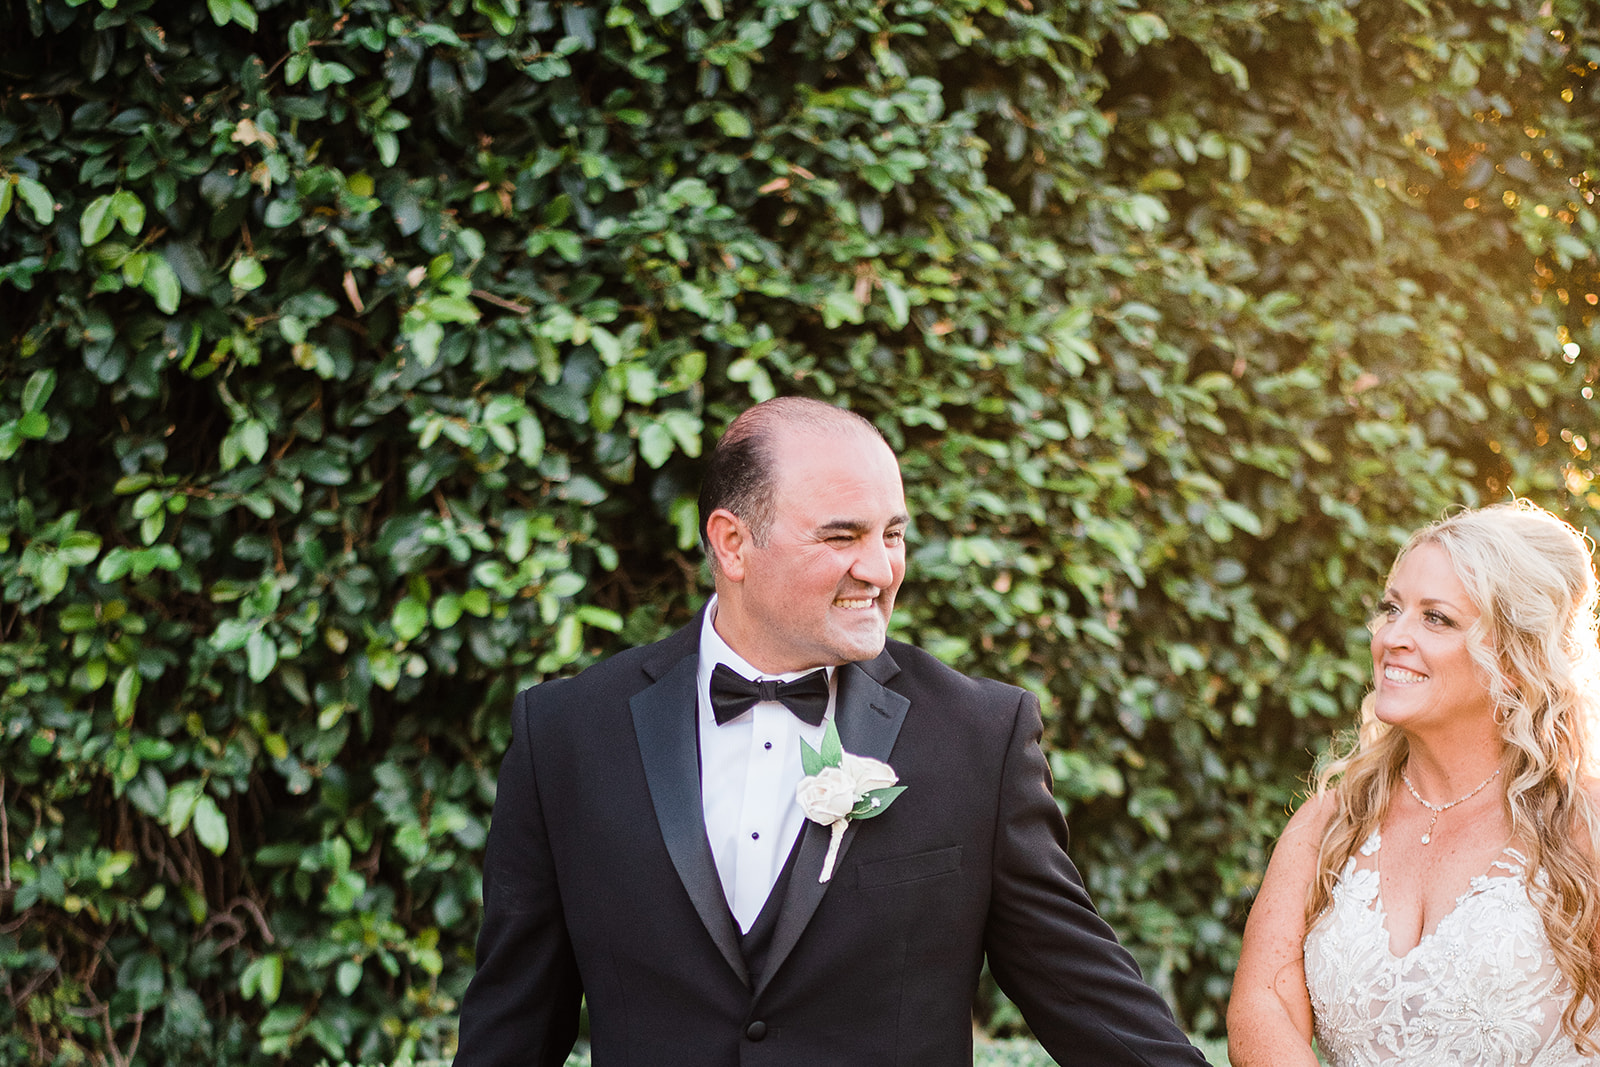 Newlyweds smile big while walking through a garden in a black tux and lace dress at their Regency Garden Wedding